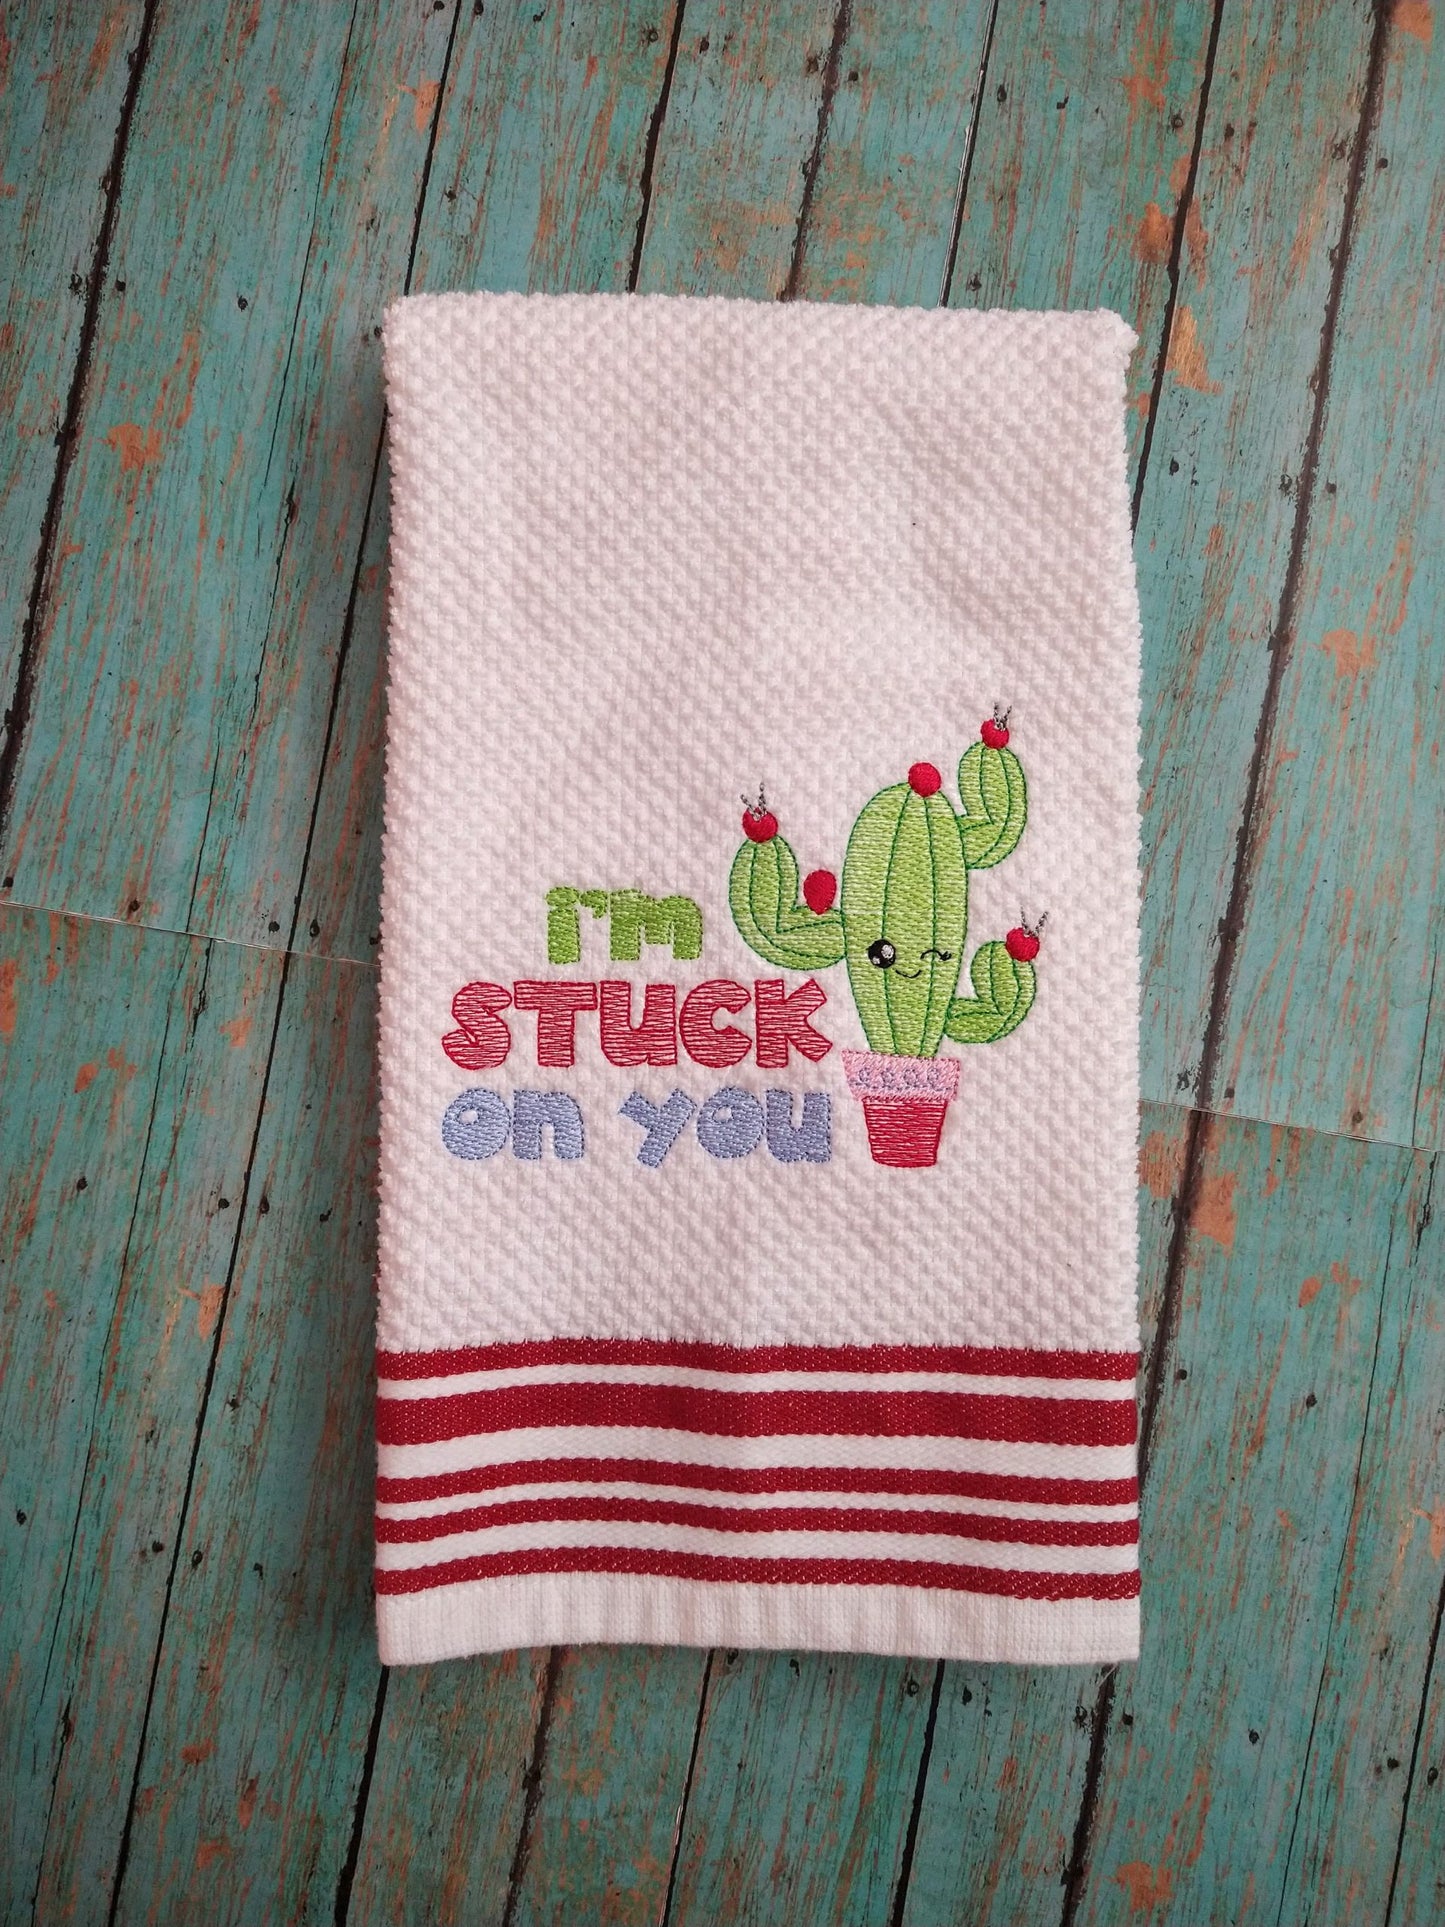 I'm Stuck On You - 2 sizes- Digital Embroidery Design